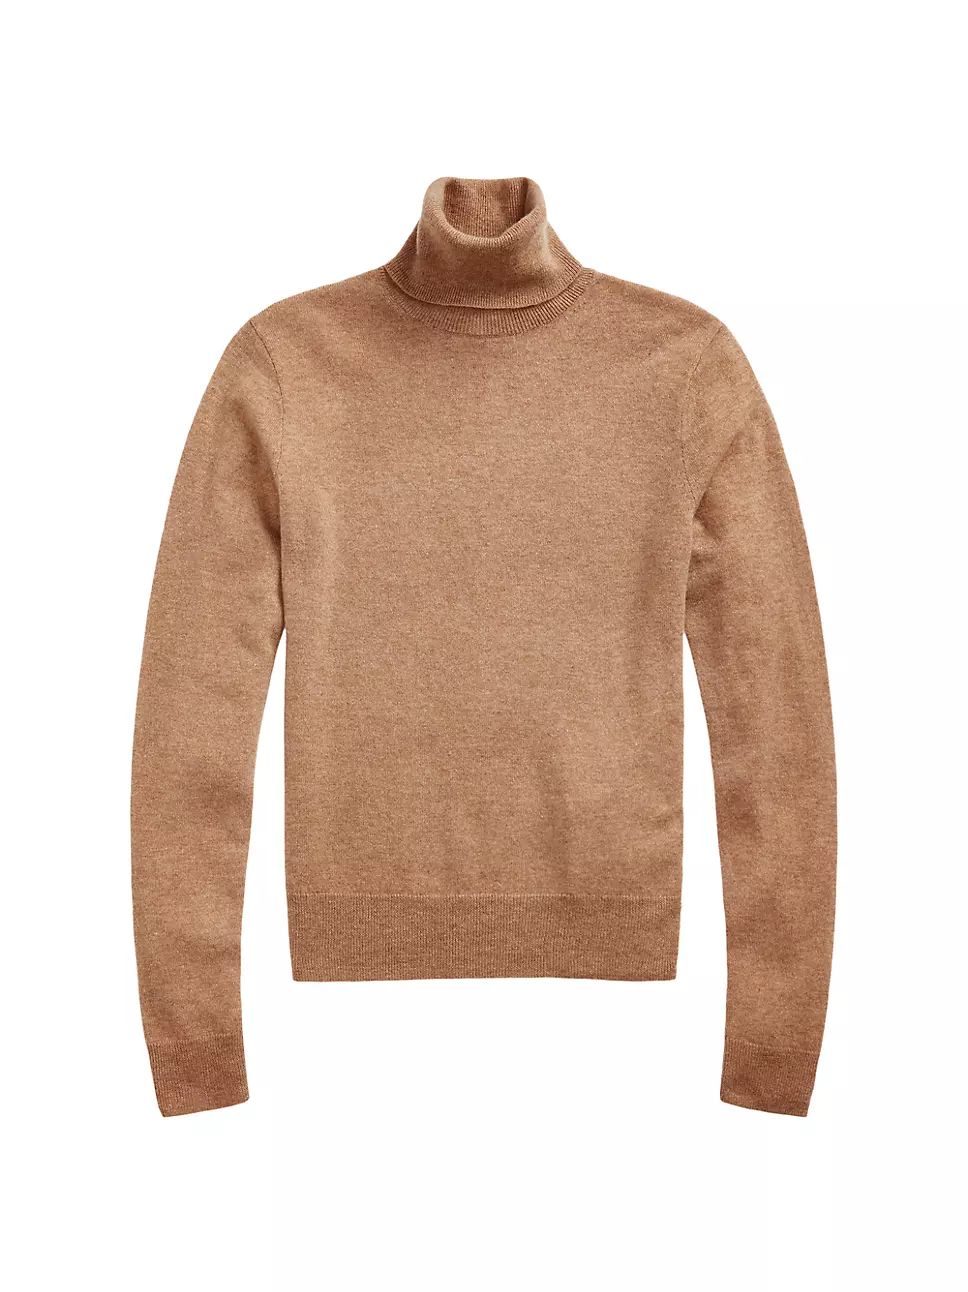 Fitted Cashmere Turtleneck Sweater | Saks Fifth Avenue